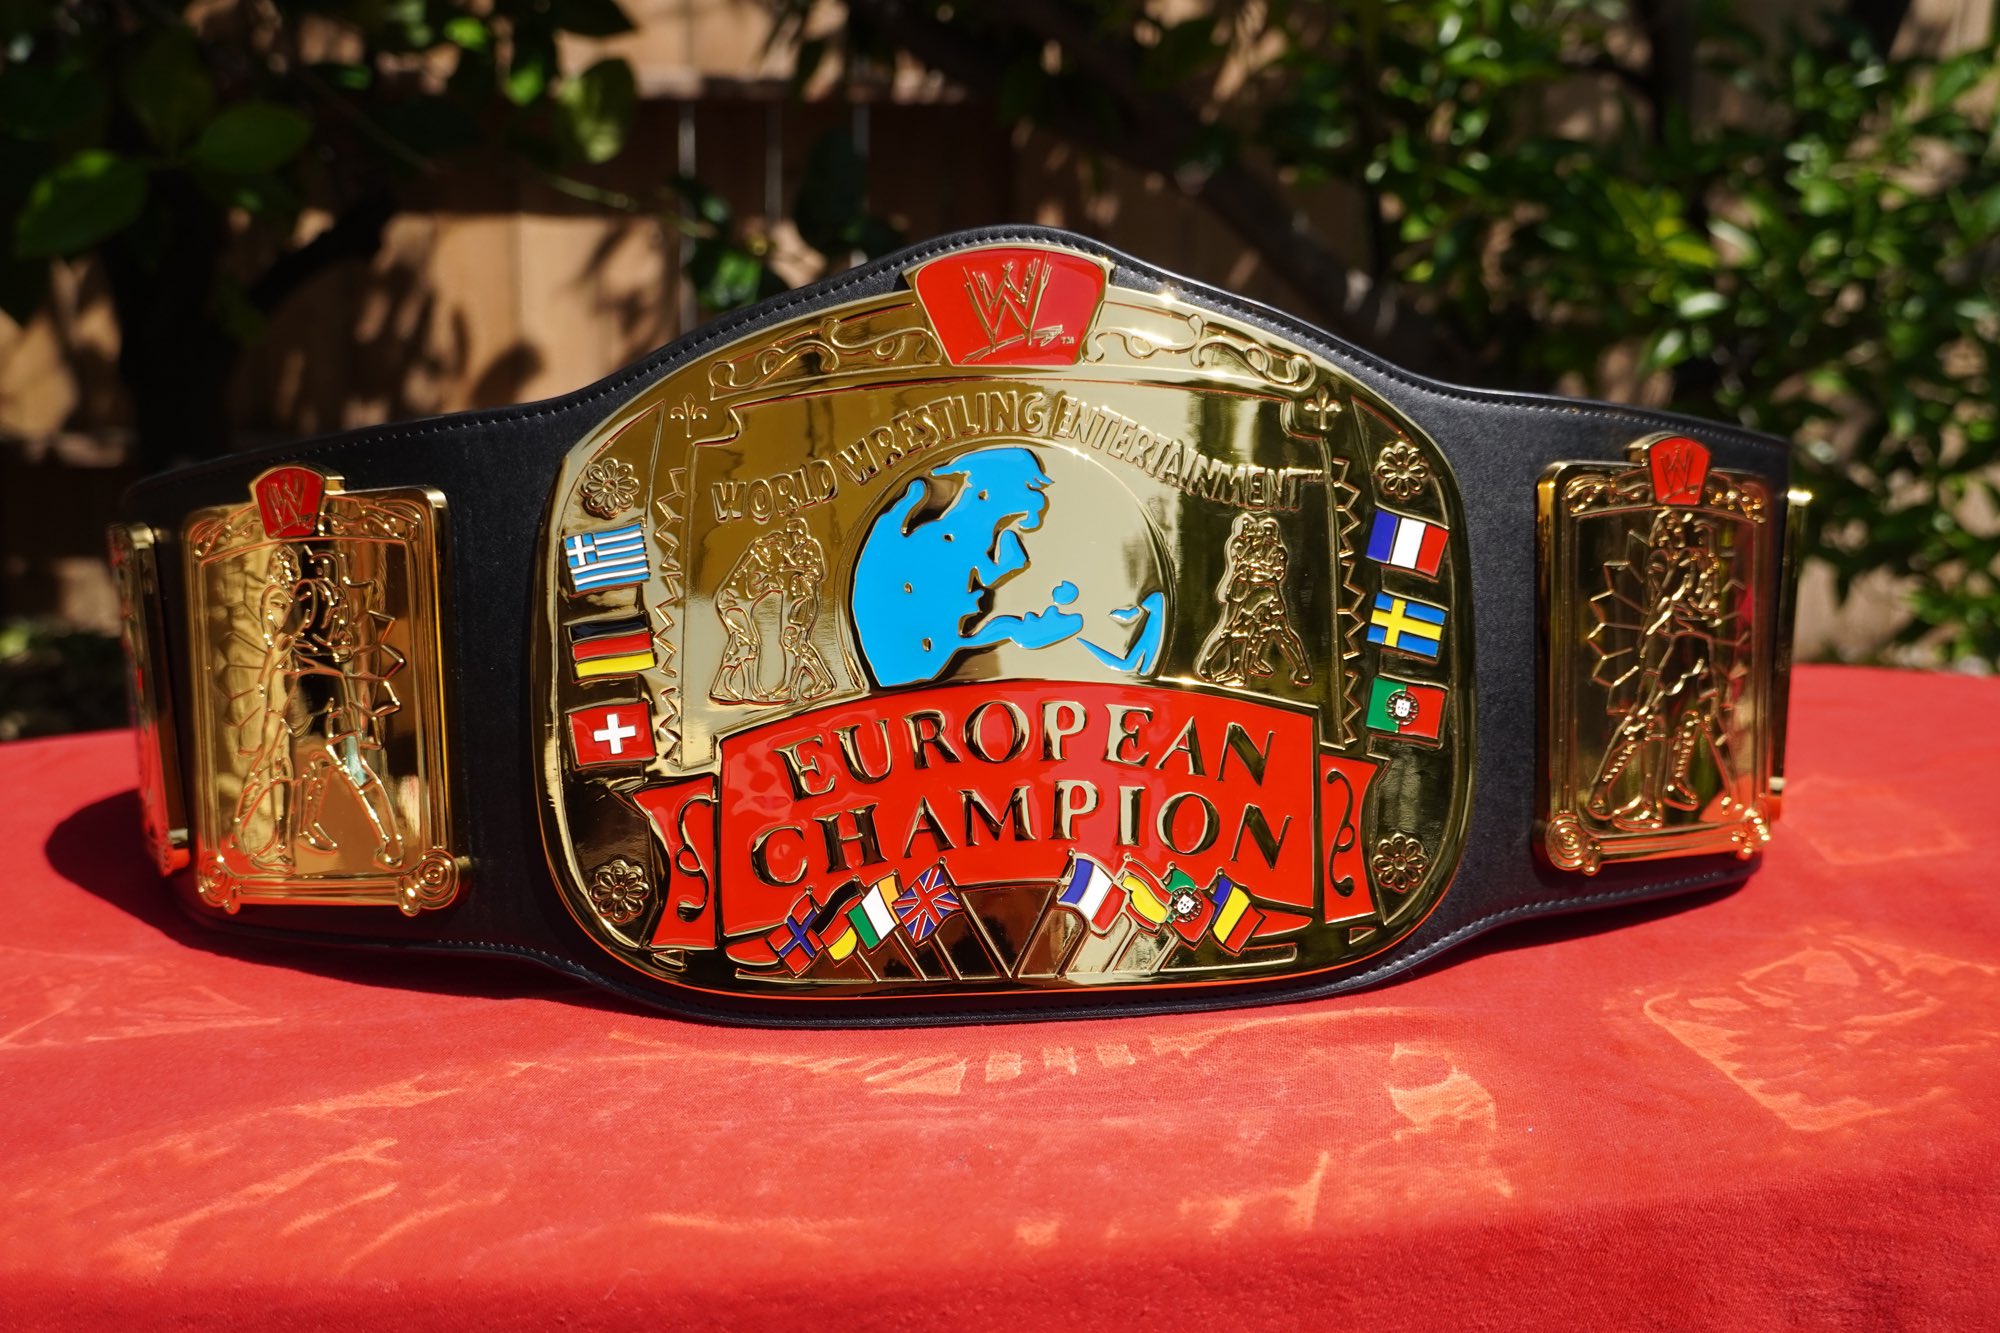 A photo of the WWE European Championship.